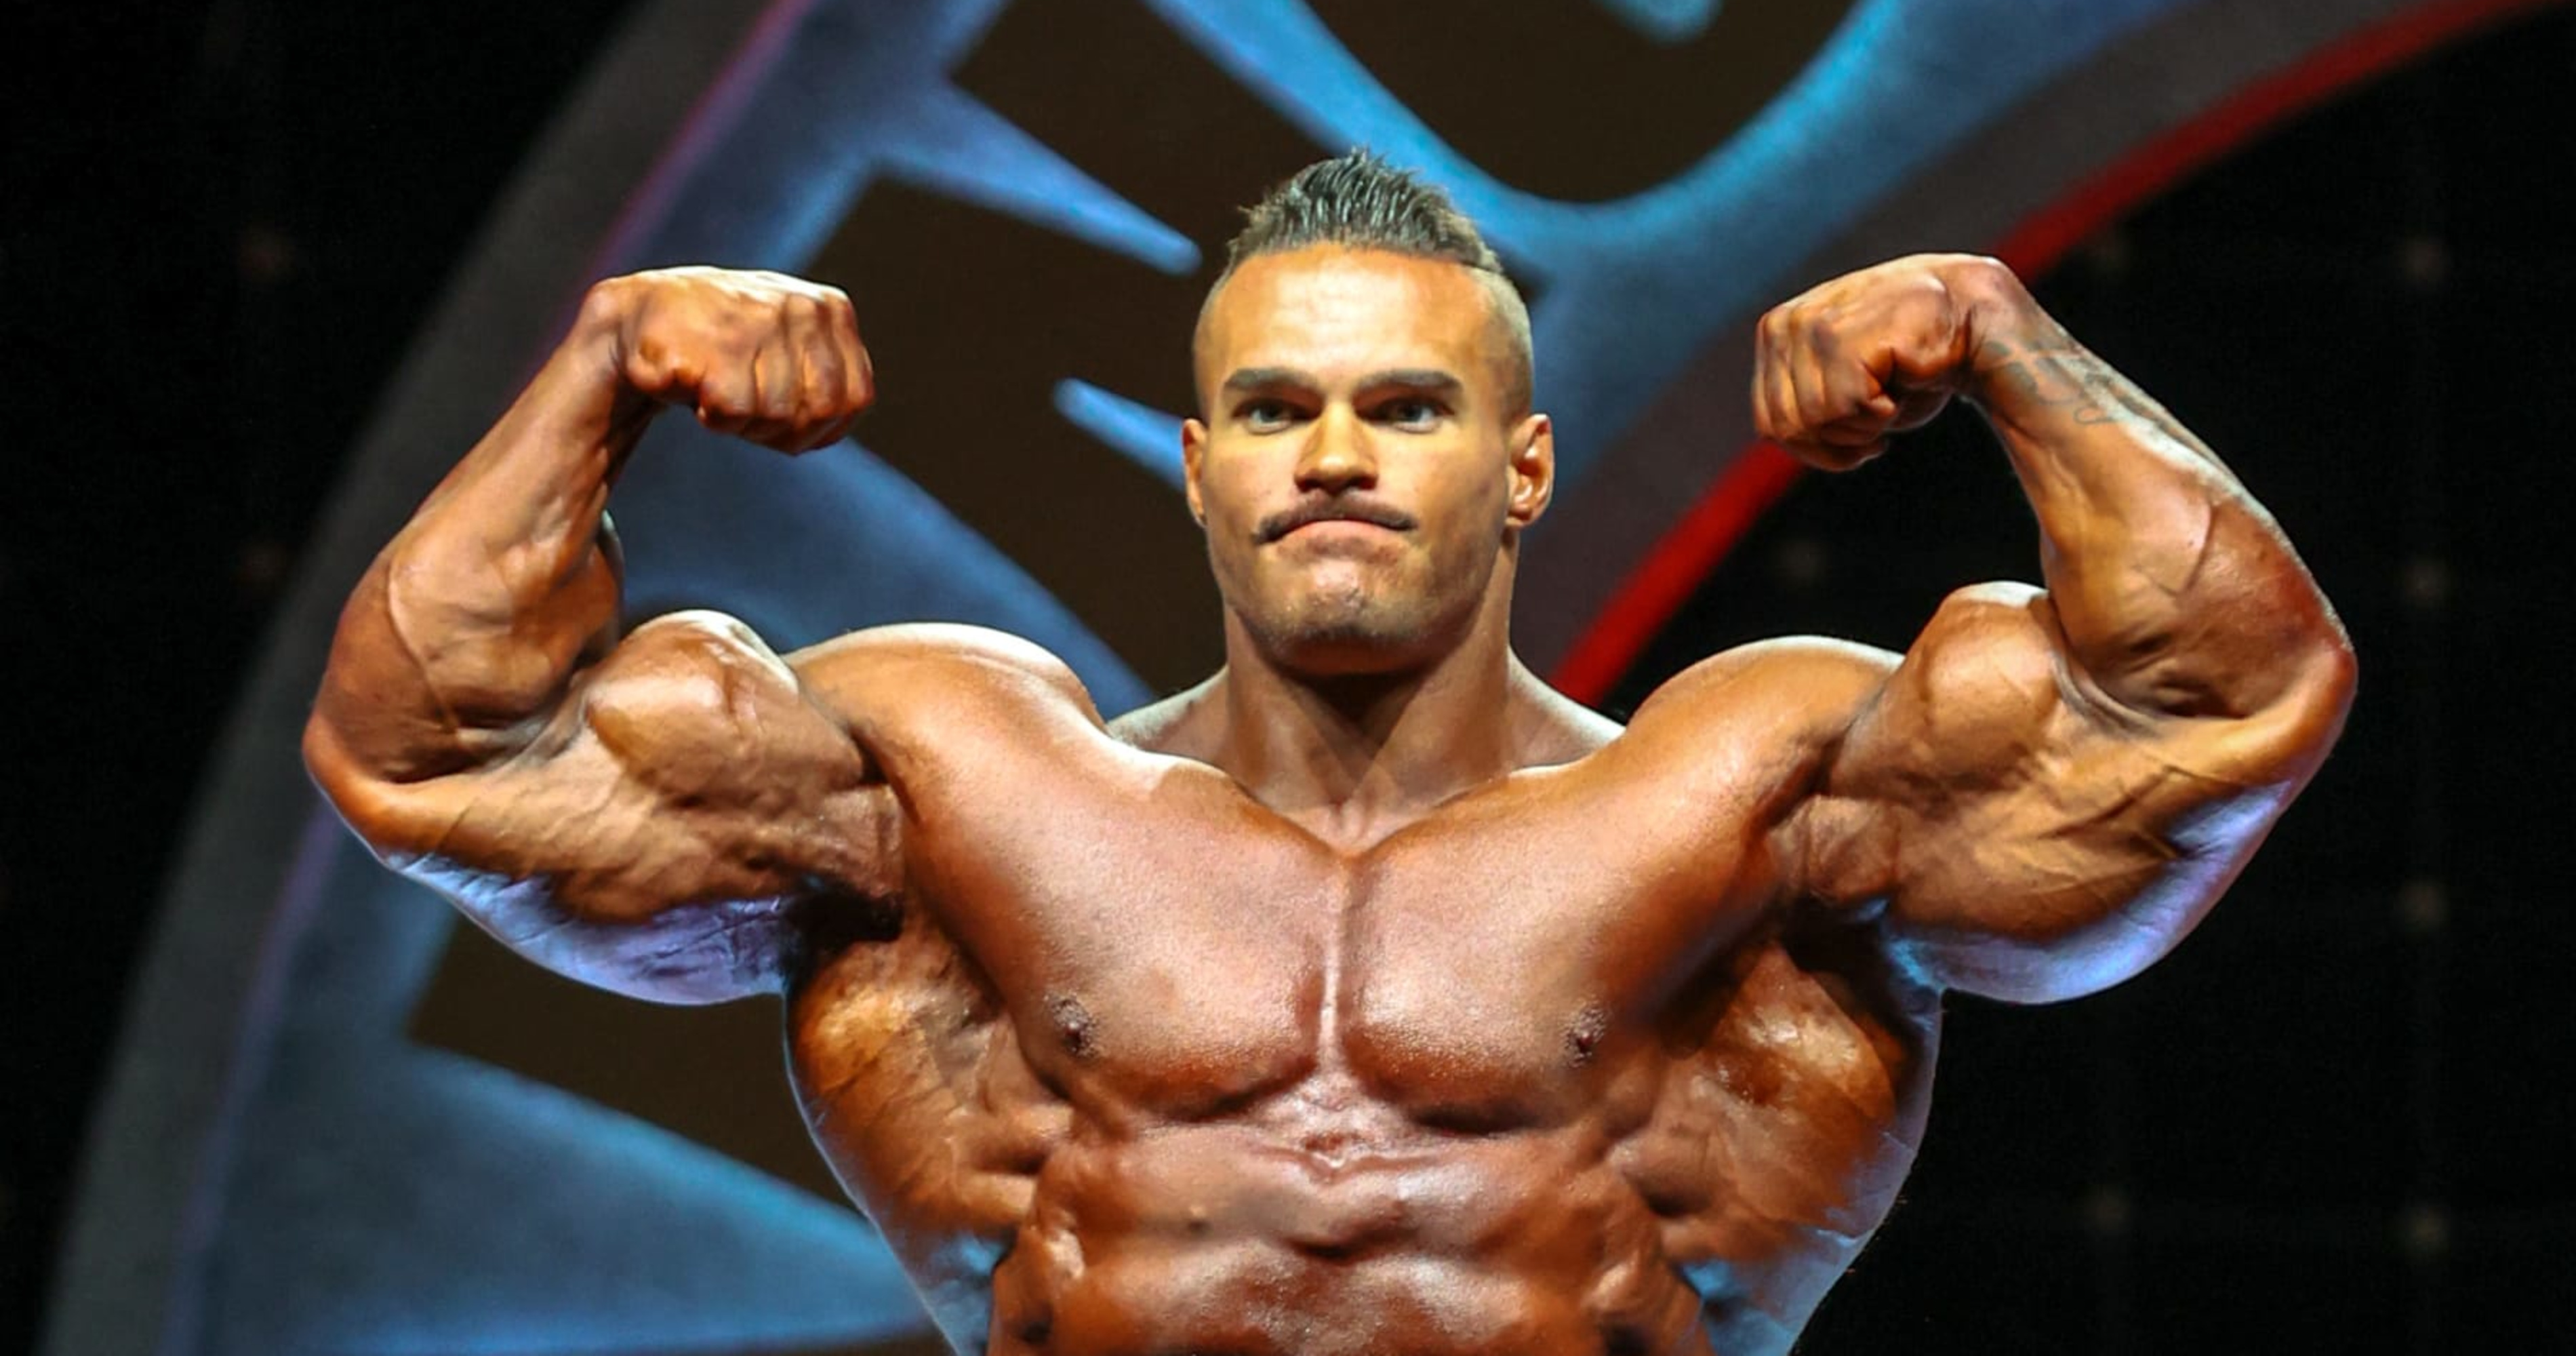 Mr. Olympia 2022: Final Results, Top Videos and Predictions for